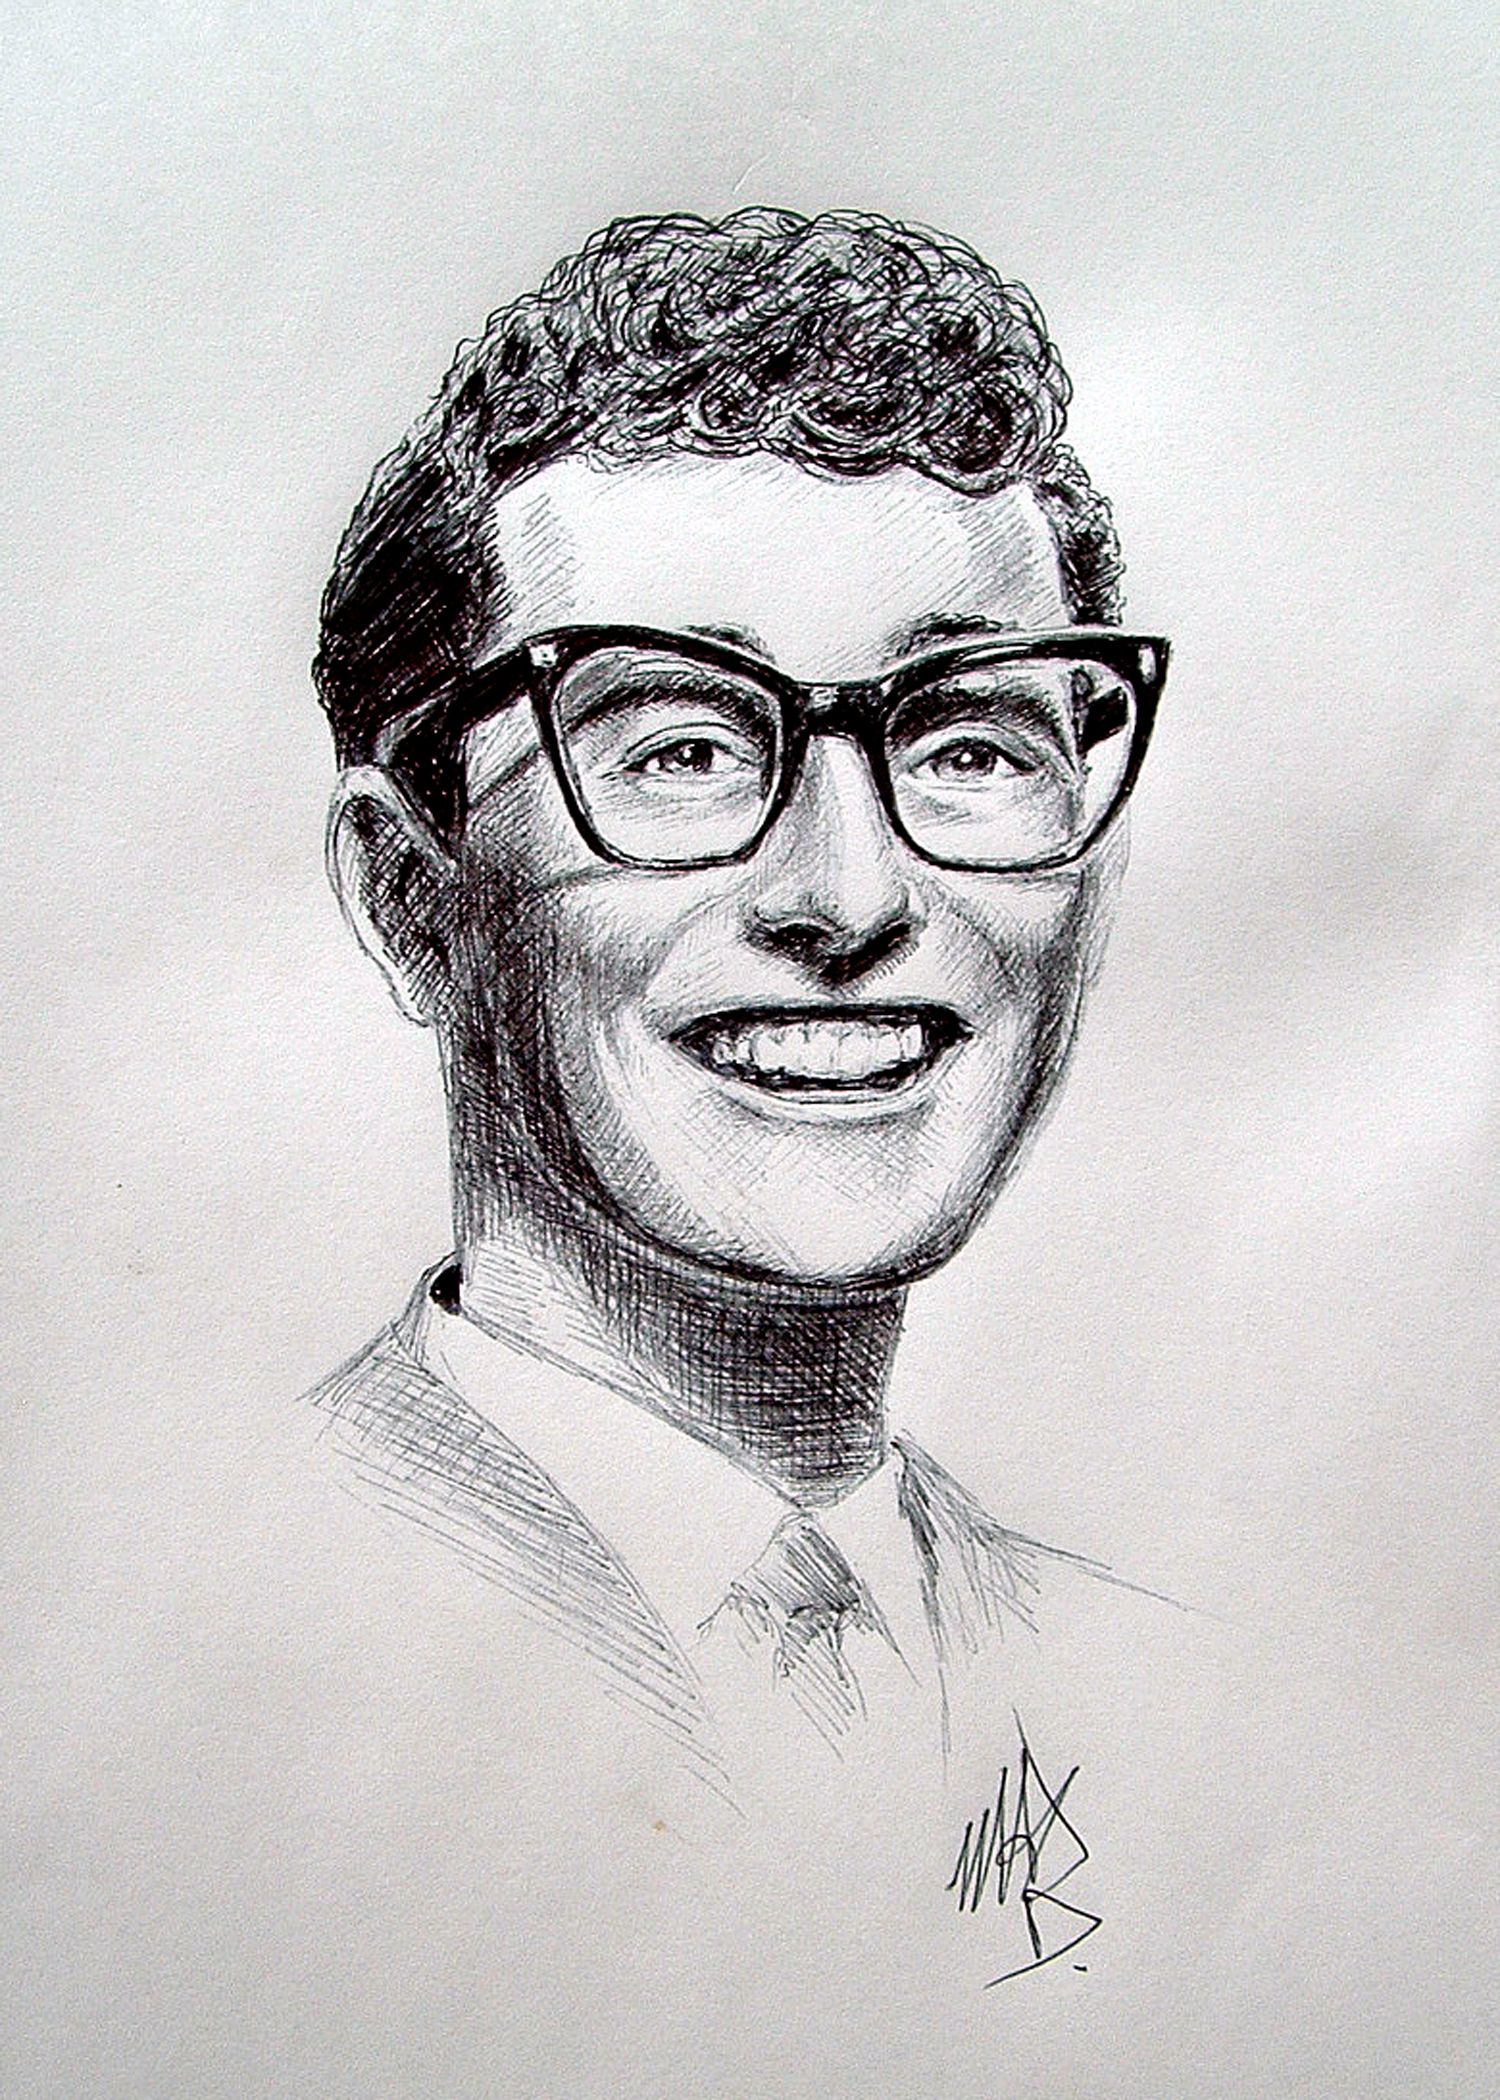 Wallpaper of the day buddy holly buddy holly wallpapers